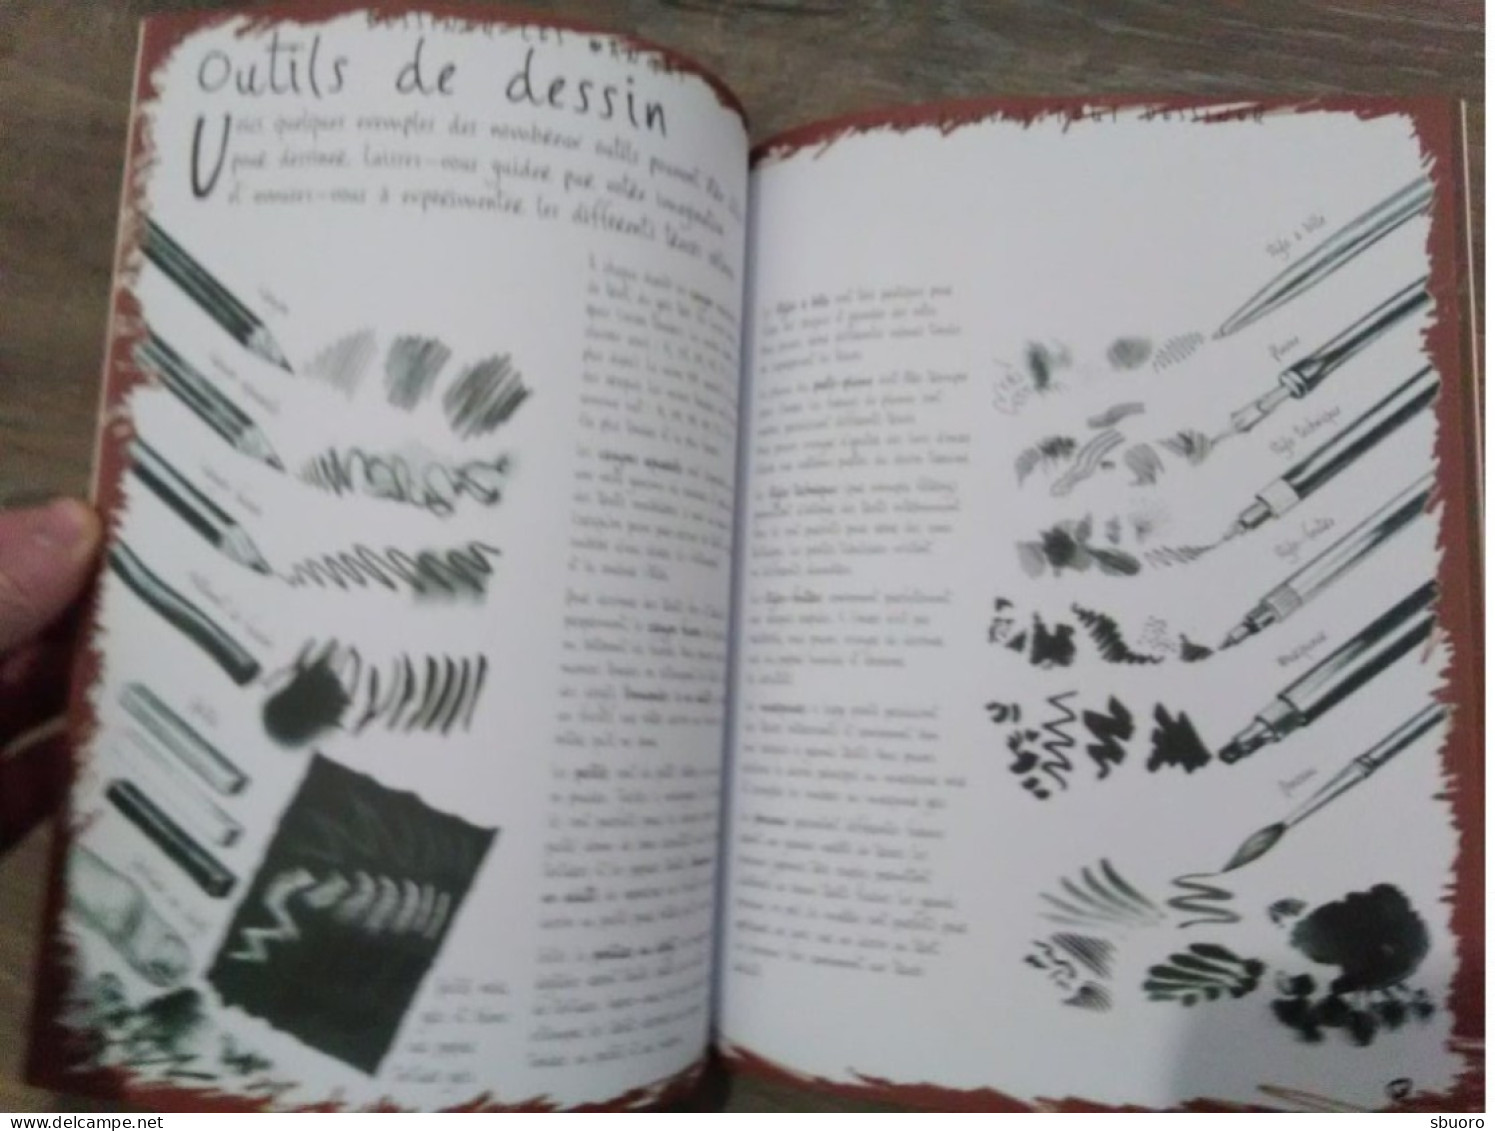 Dessiner Les Mangas. David Atram. Editions Eyrolles - Other & Unclassified